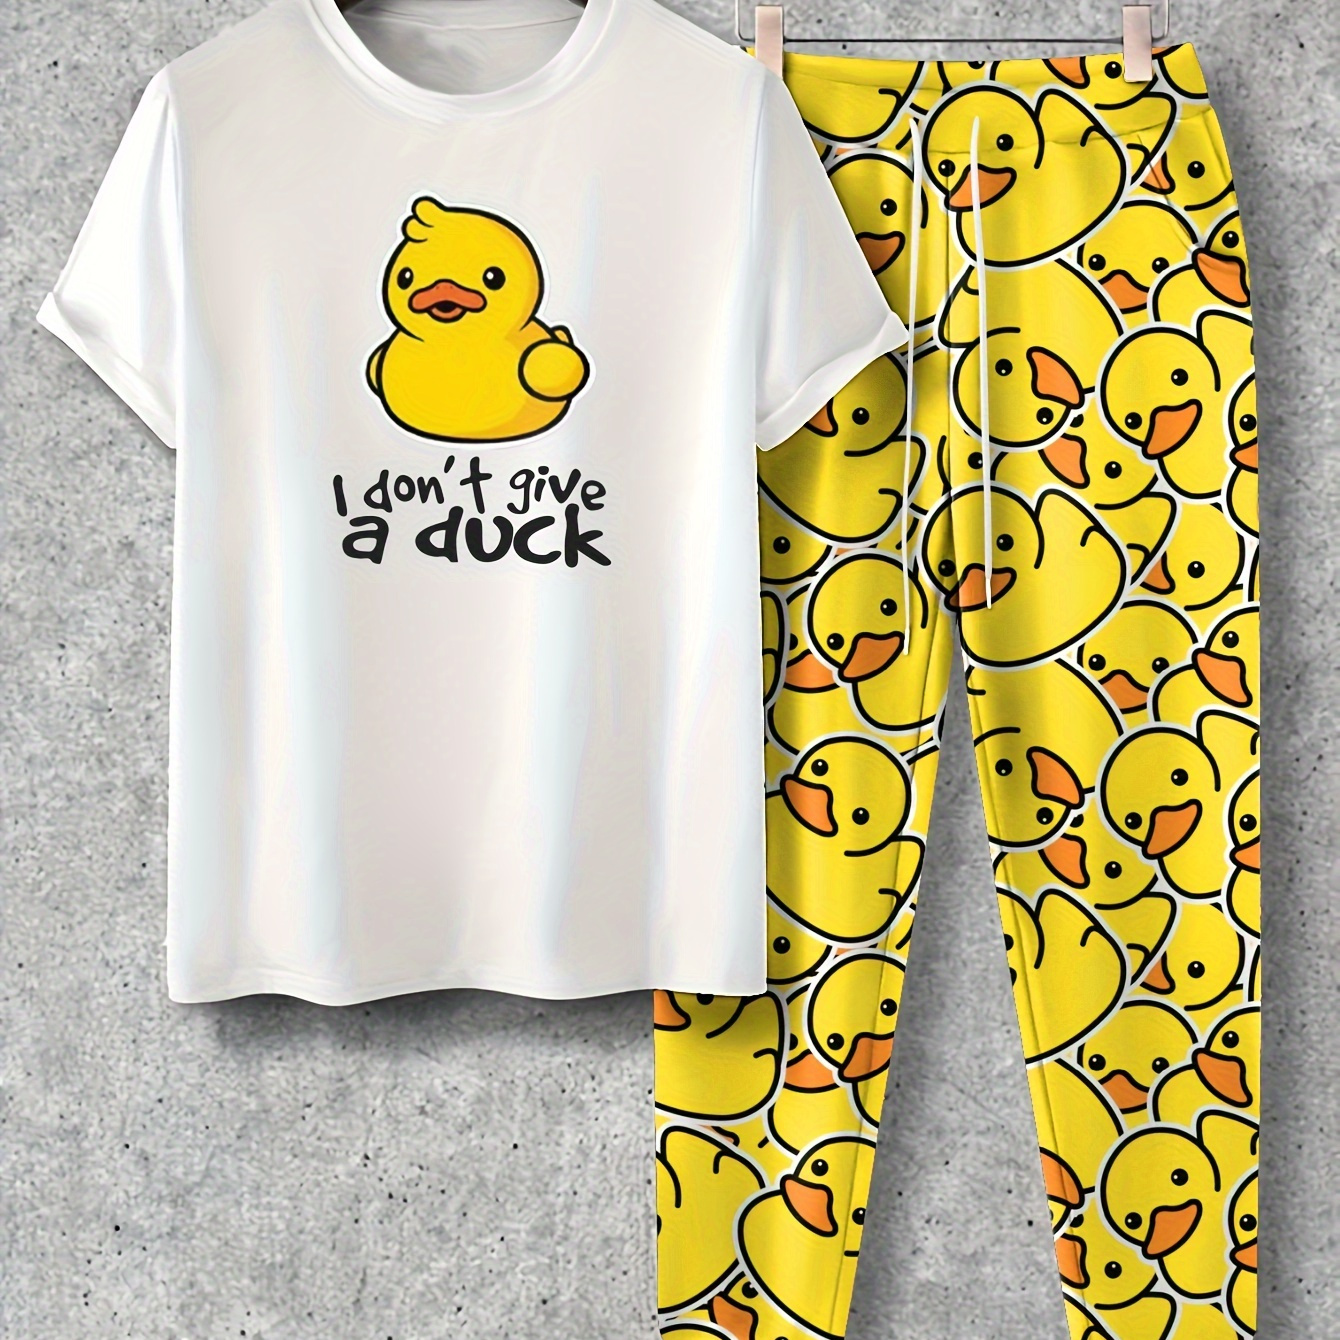 

Men's 2-pack Co Ord Set Of Cartoon Duck Pattern Casual Outfits, Crew Neck And Short Sleeve T-shirt And Drawstring Pants, Chic And Stylish Set For Daily Leisurewear